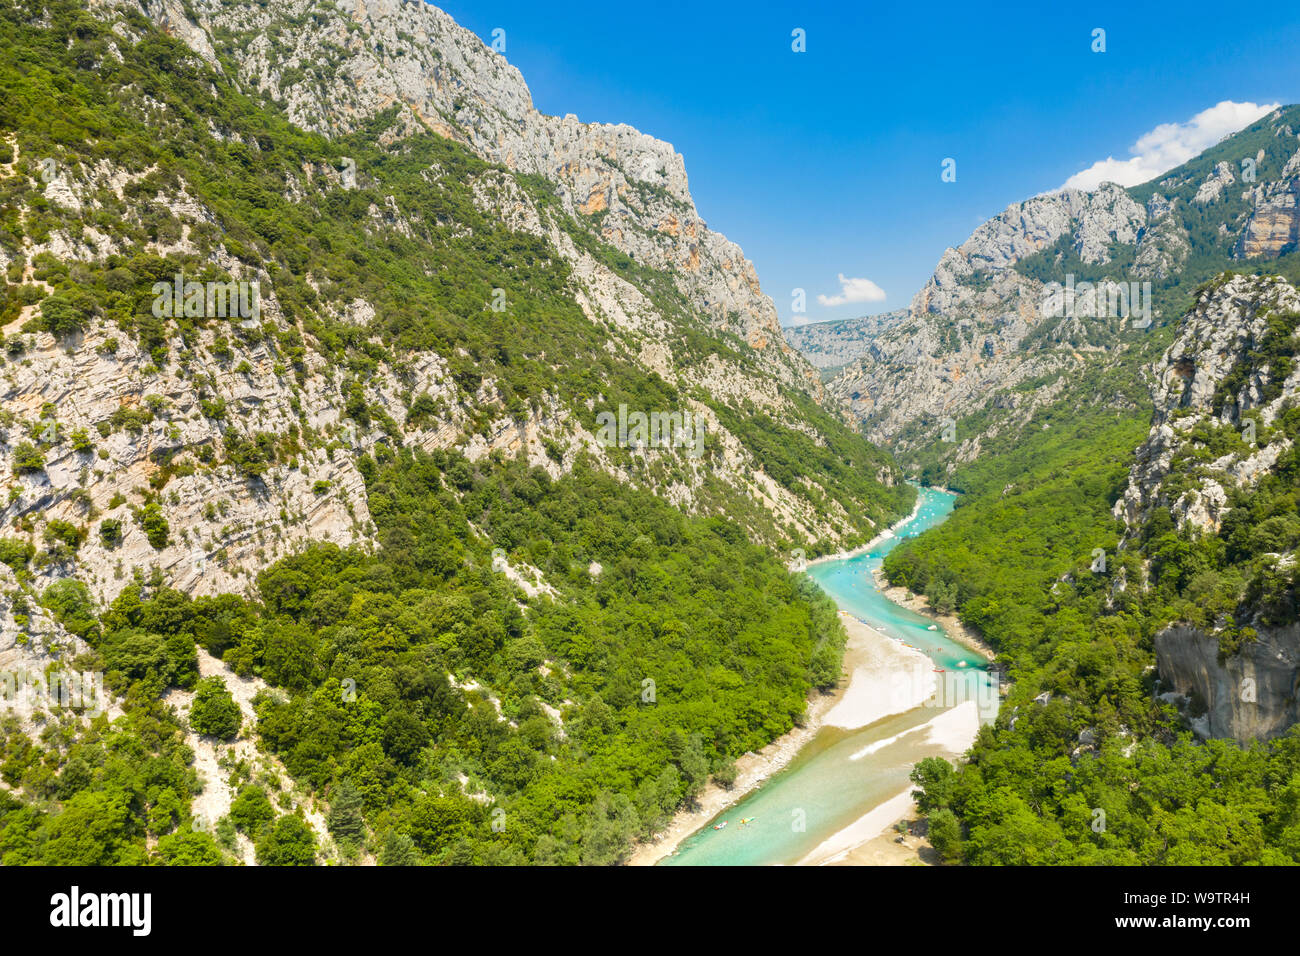 Panoramic view of the Gorges du Verdon, Grand Canyon, left bank. Aiguines, Provence, France. Stock Photo